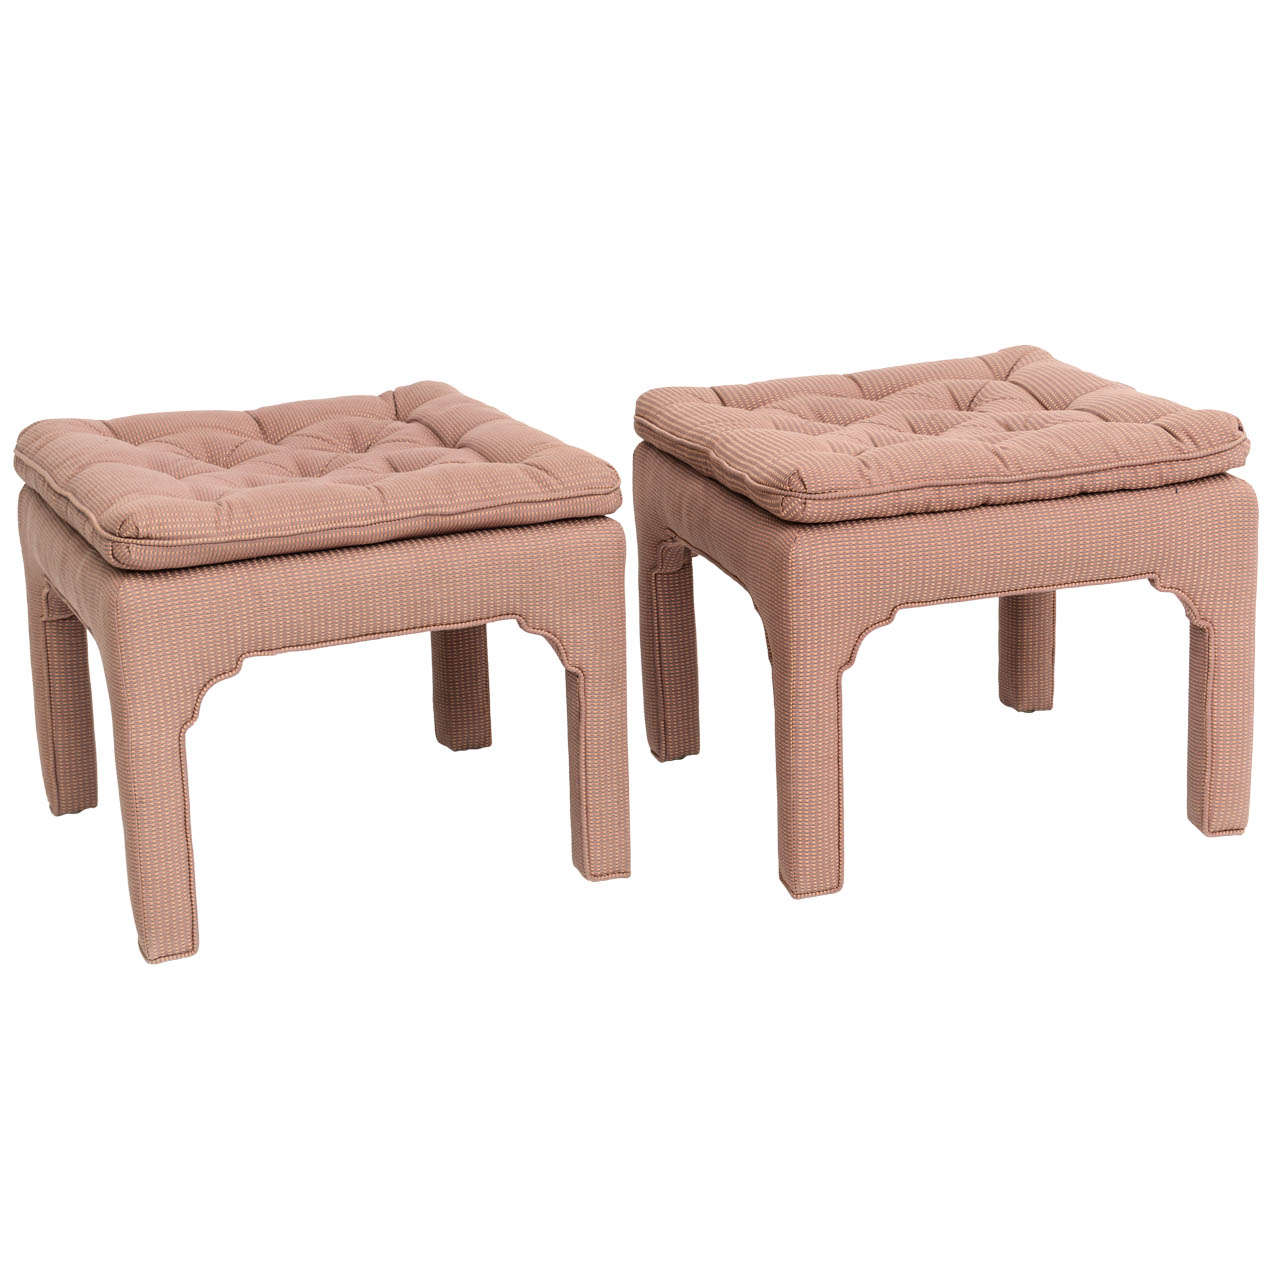 Pair of Milo Baughman Style Tufted Upholstered Benches